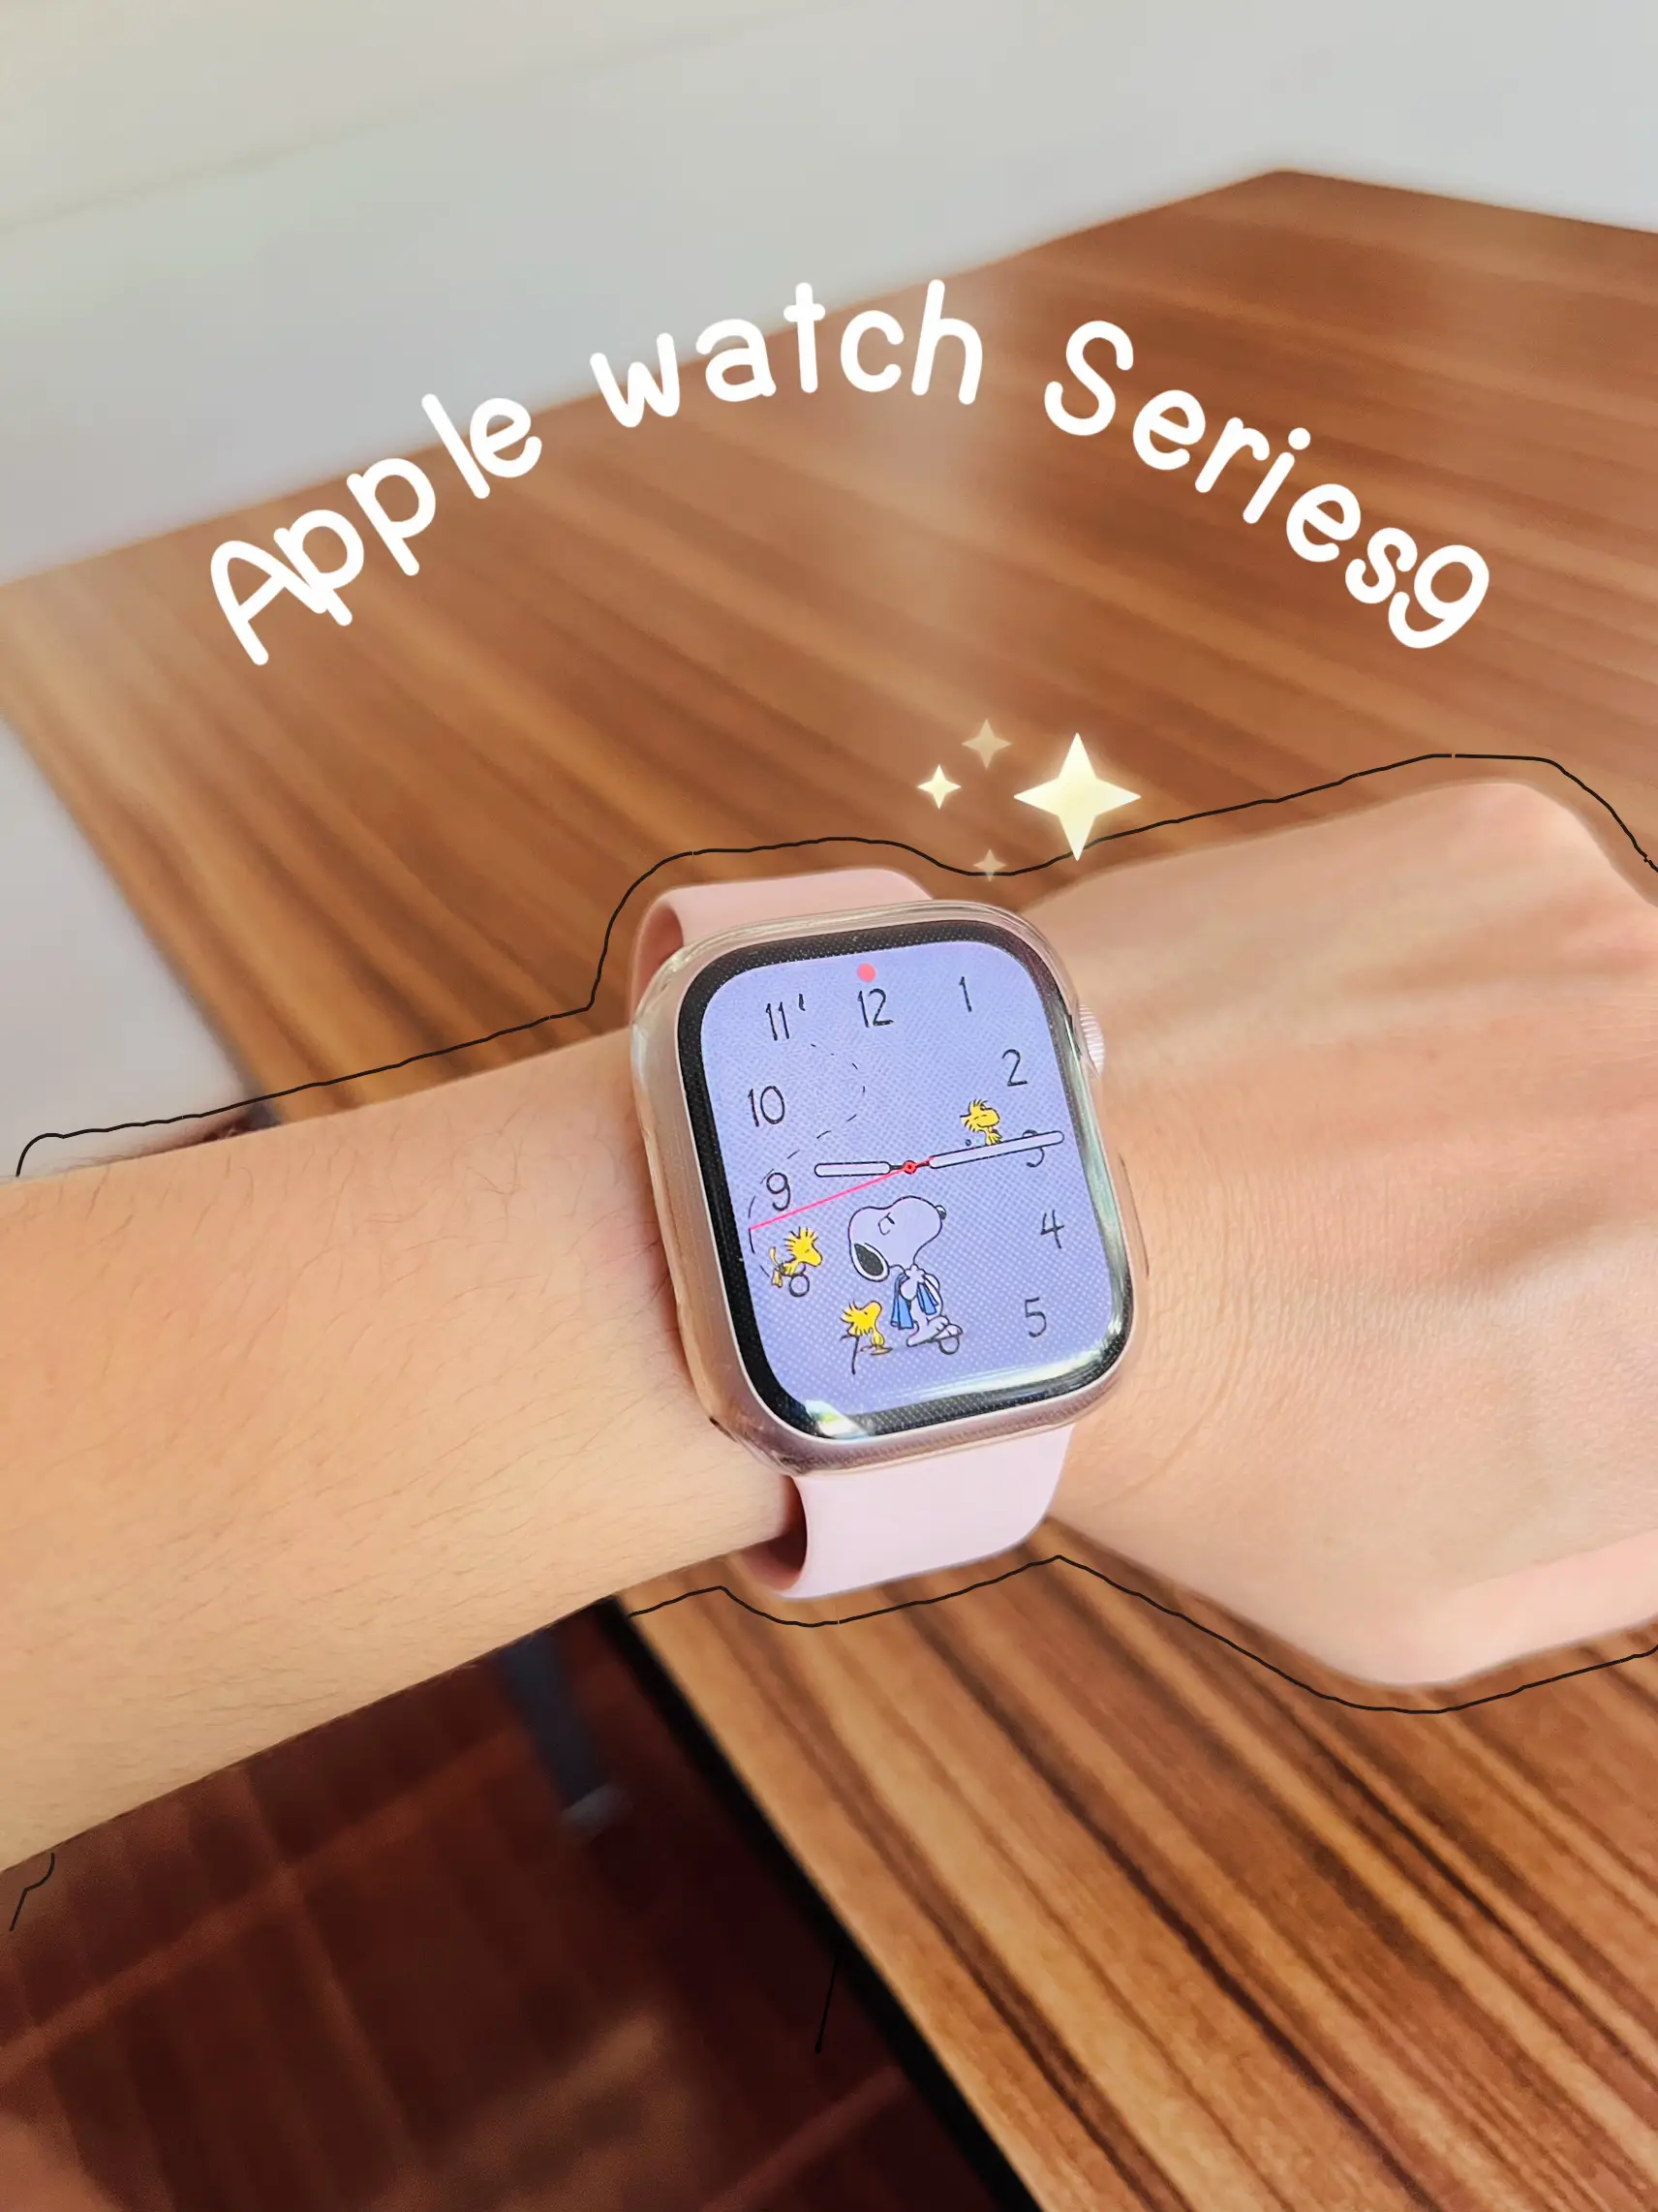 APPLE WATCH IS A NO GO, Gallery posted by LaurensLetters